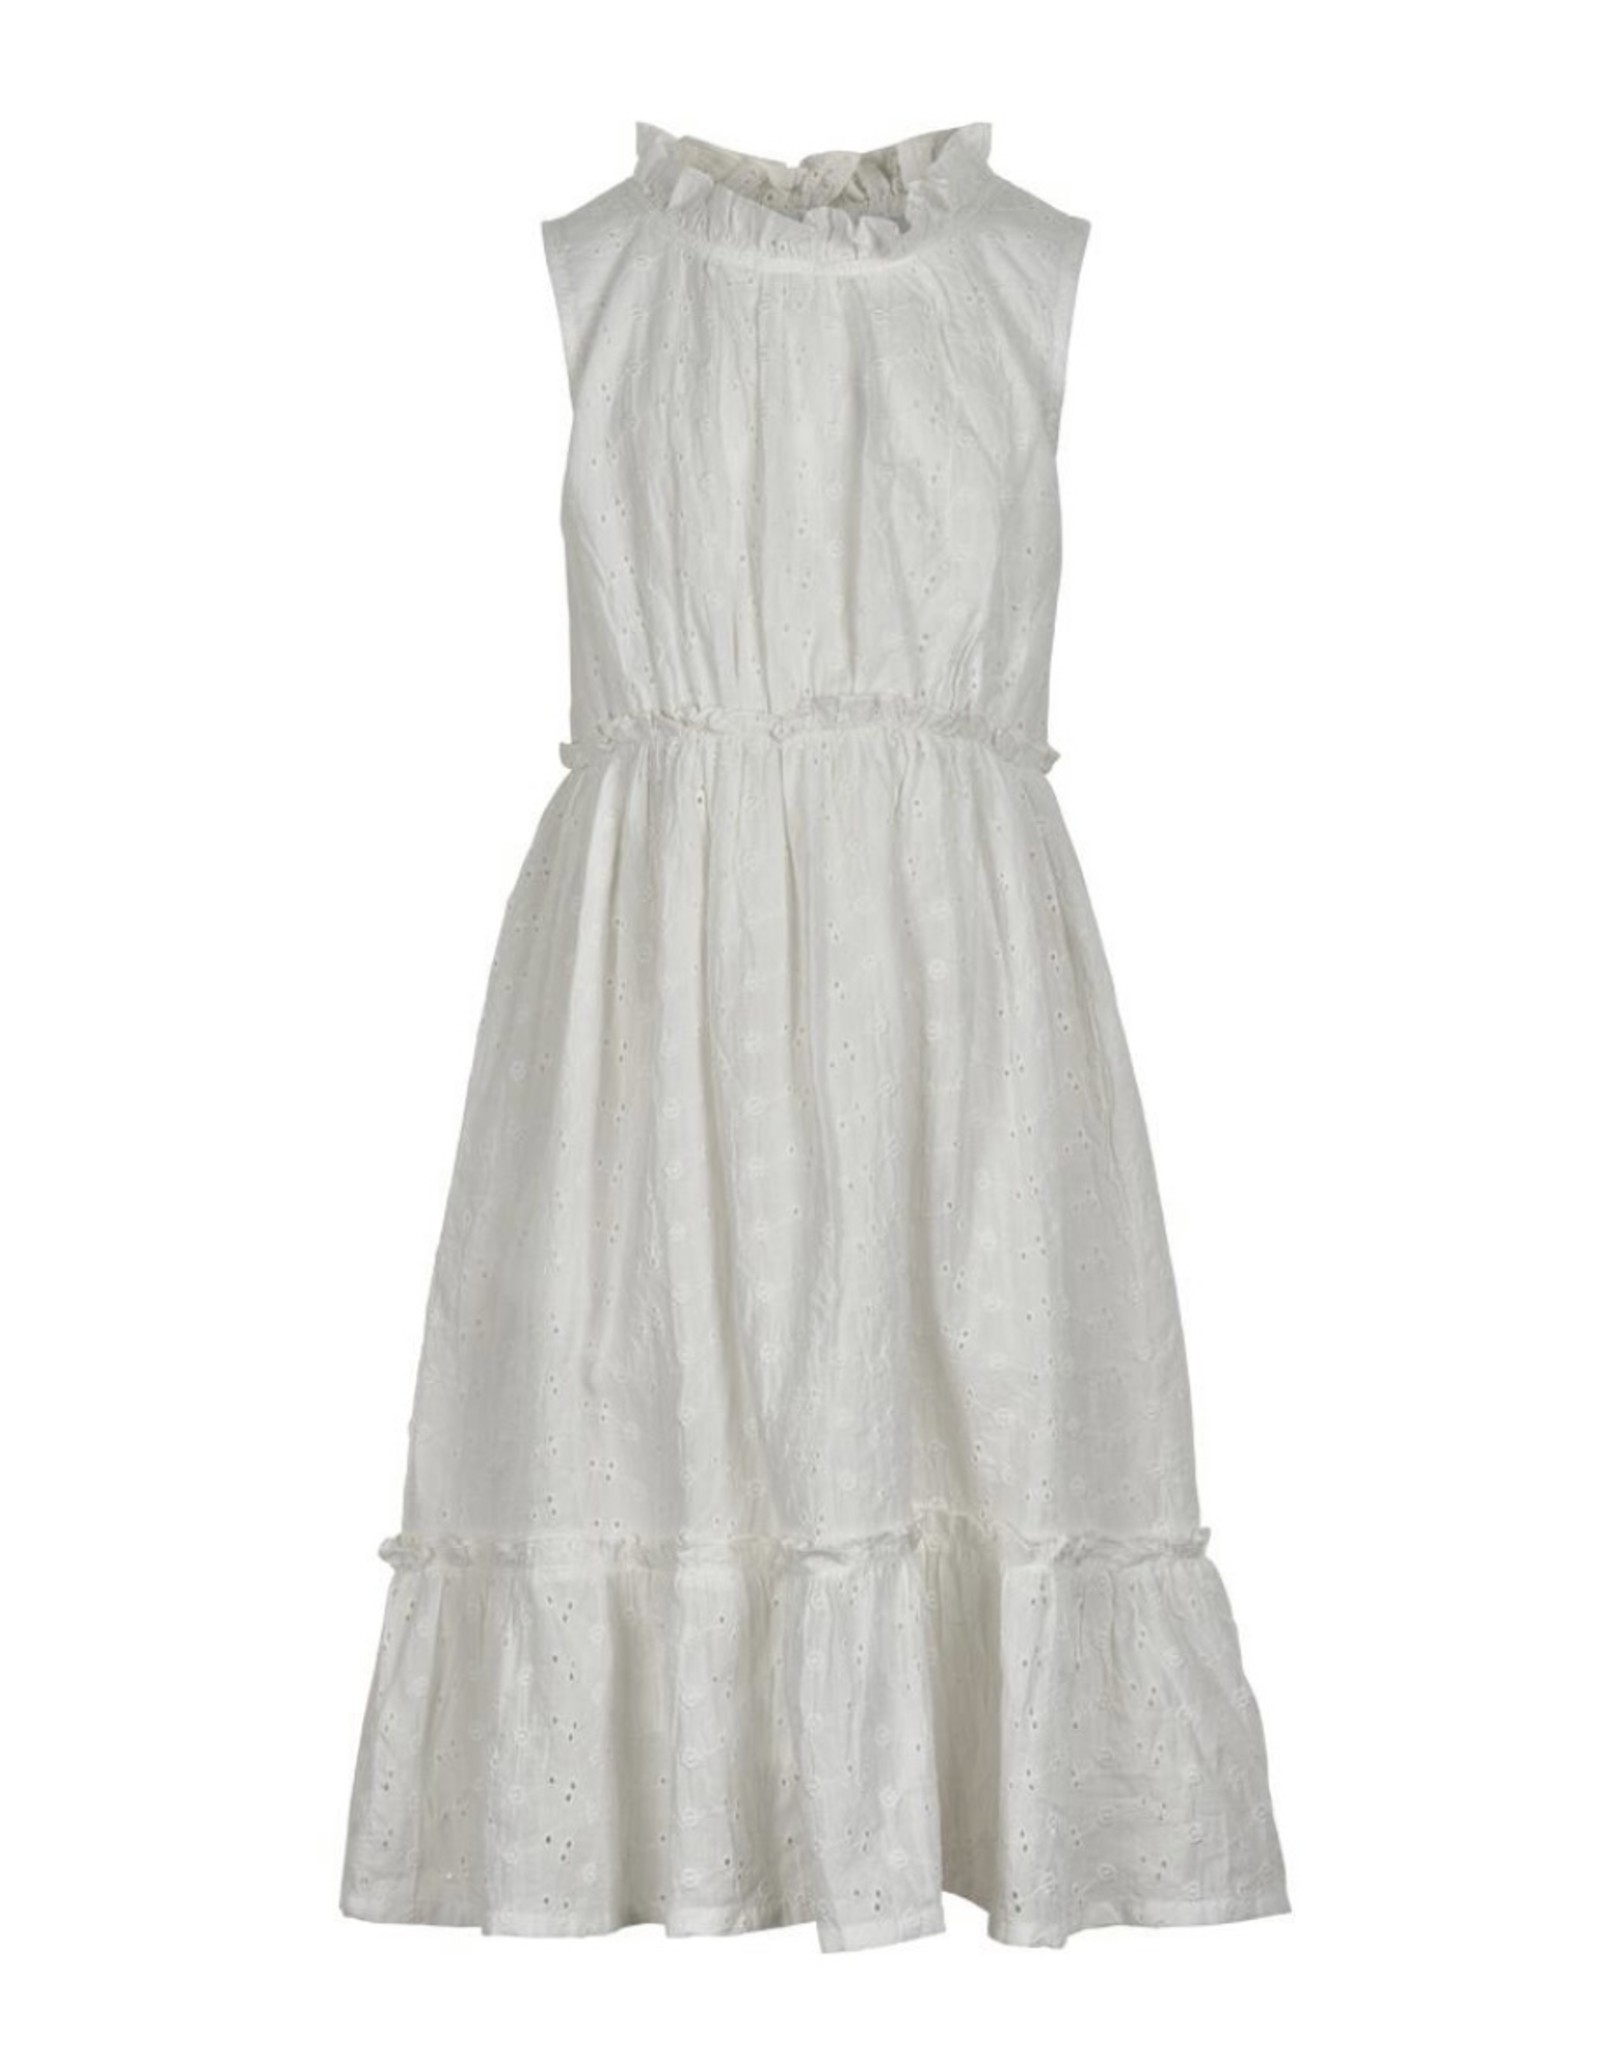 Creamie 821605 Eyelet Embroidered Dress